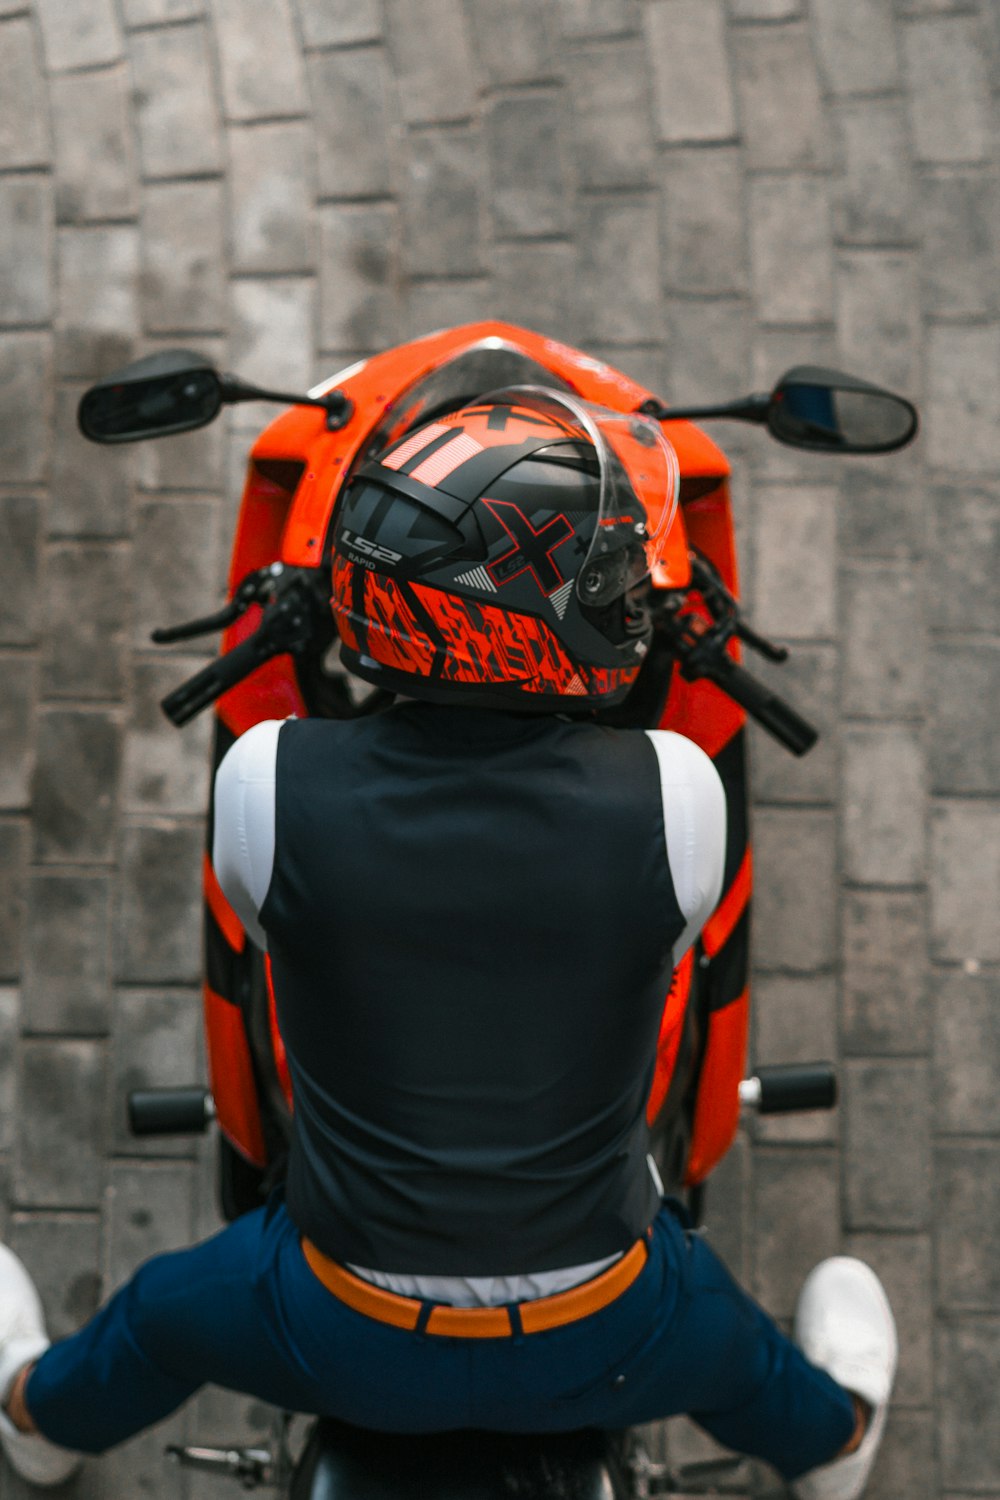 a person sitting on a motorcycle with a helmet on